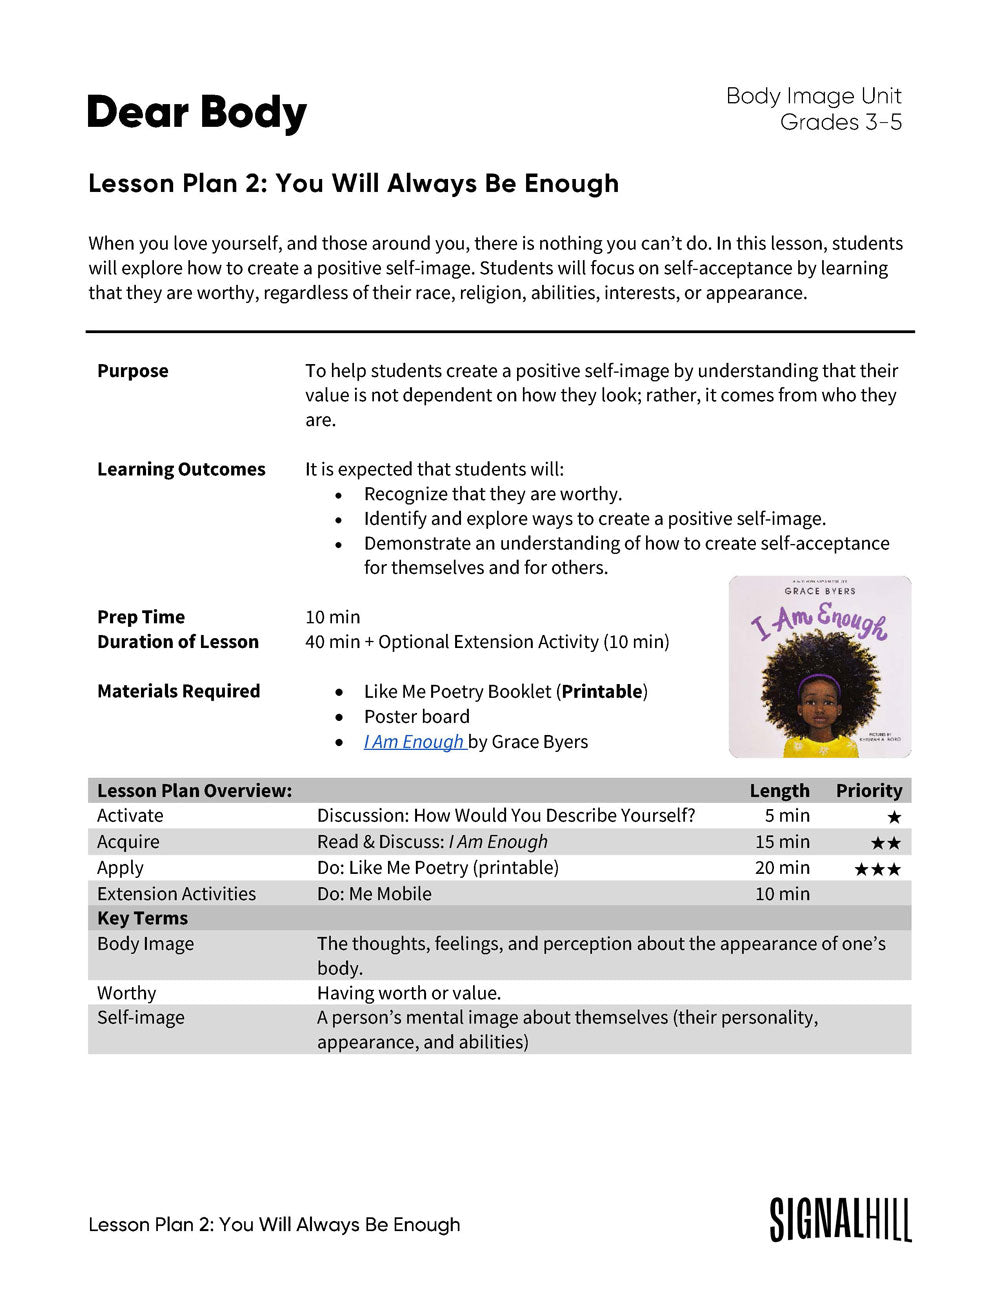 Lesson Plan 2: You Will Always Be Enough